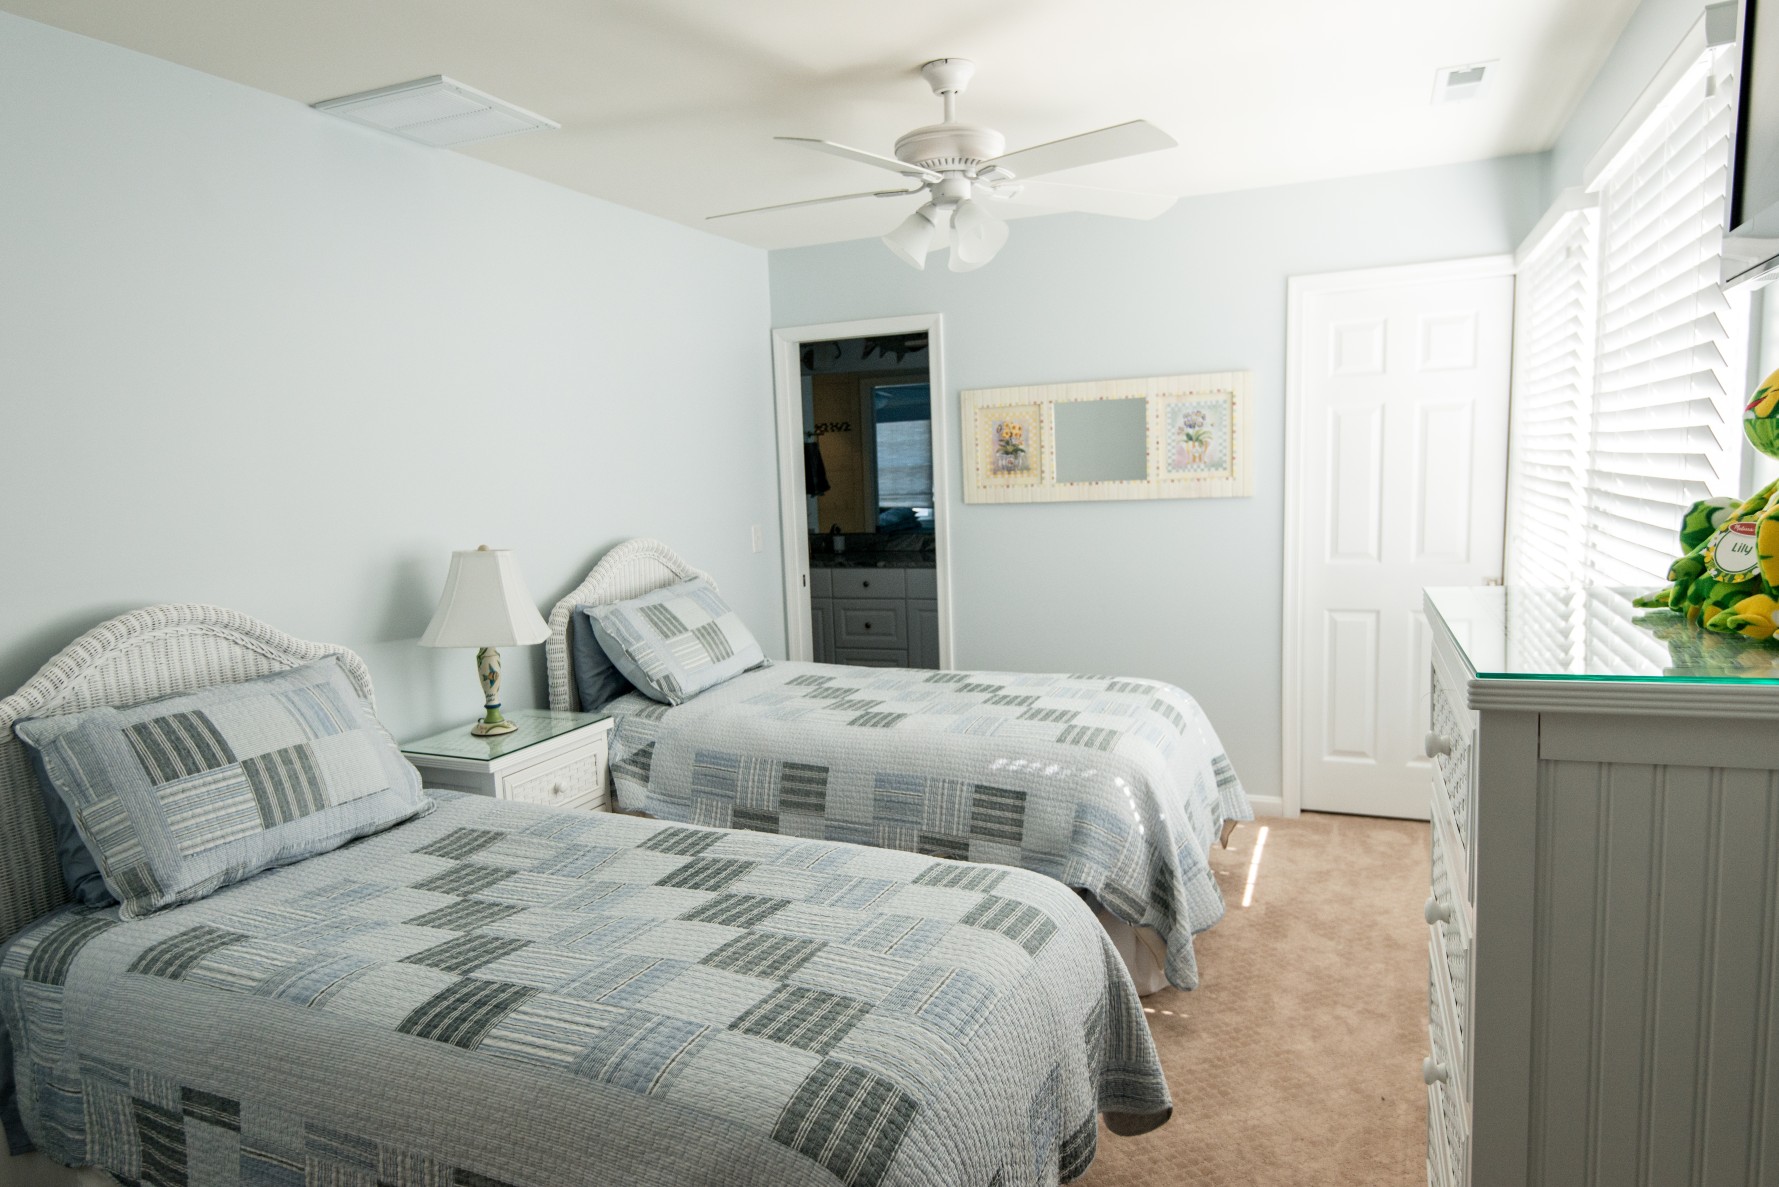 Willow Oak New Addition in Bear Trap Dunes, Ocean View DE Two Beds Guest Bedroom with Carpet and Sea Foam Painted Walls